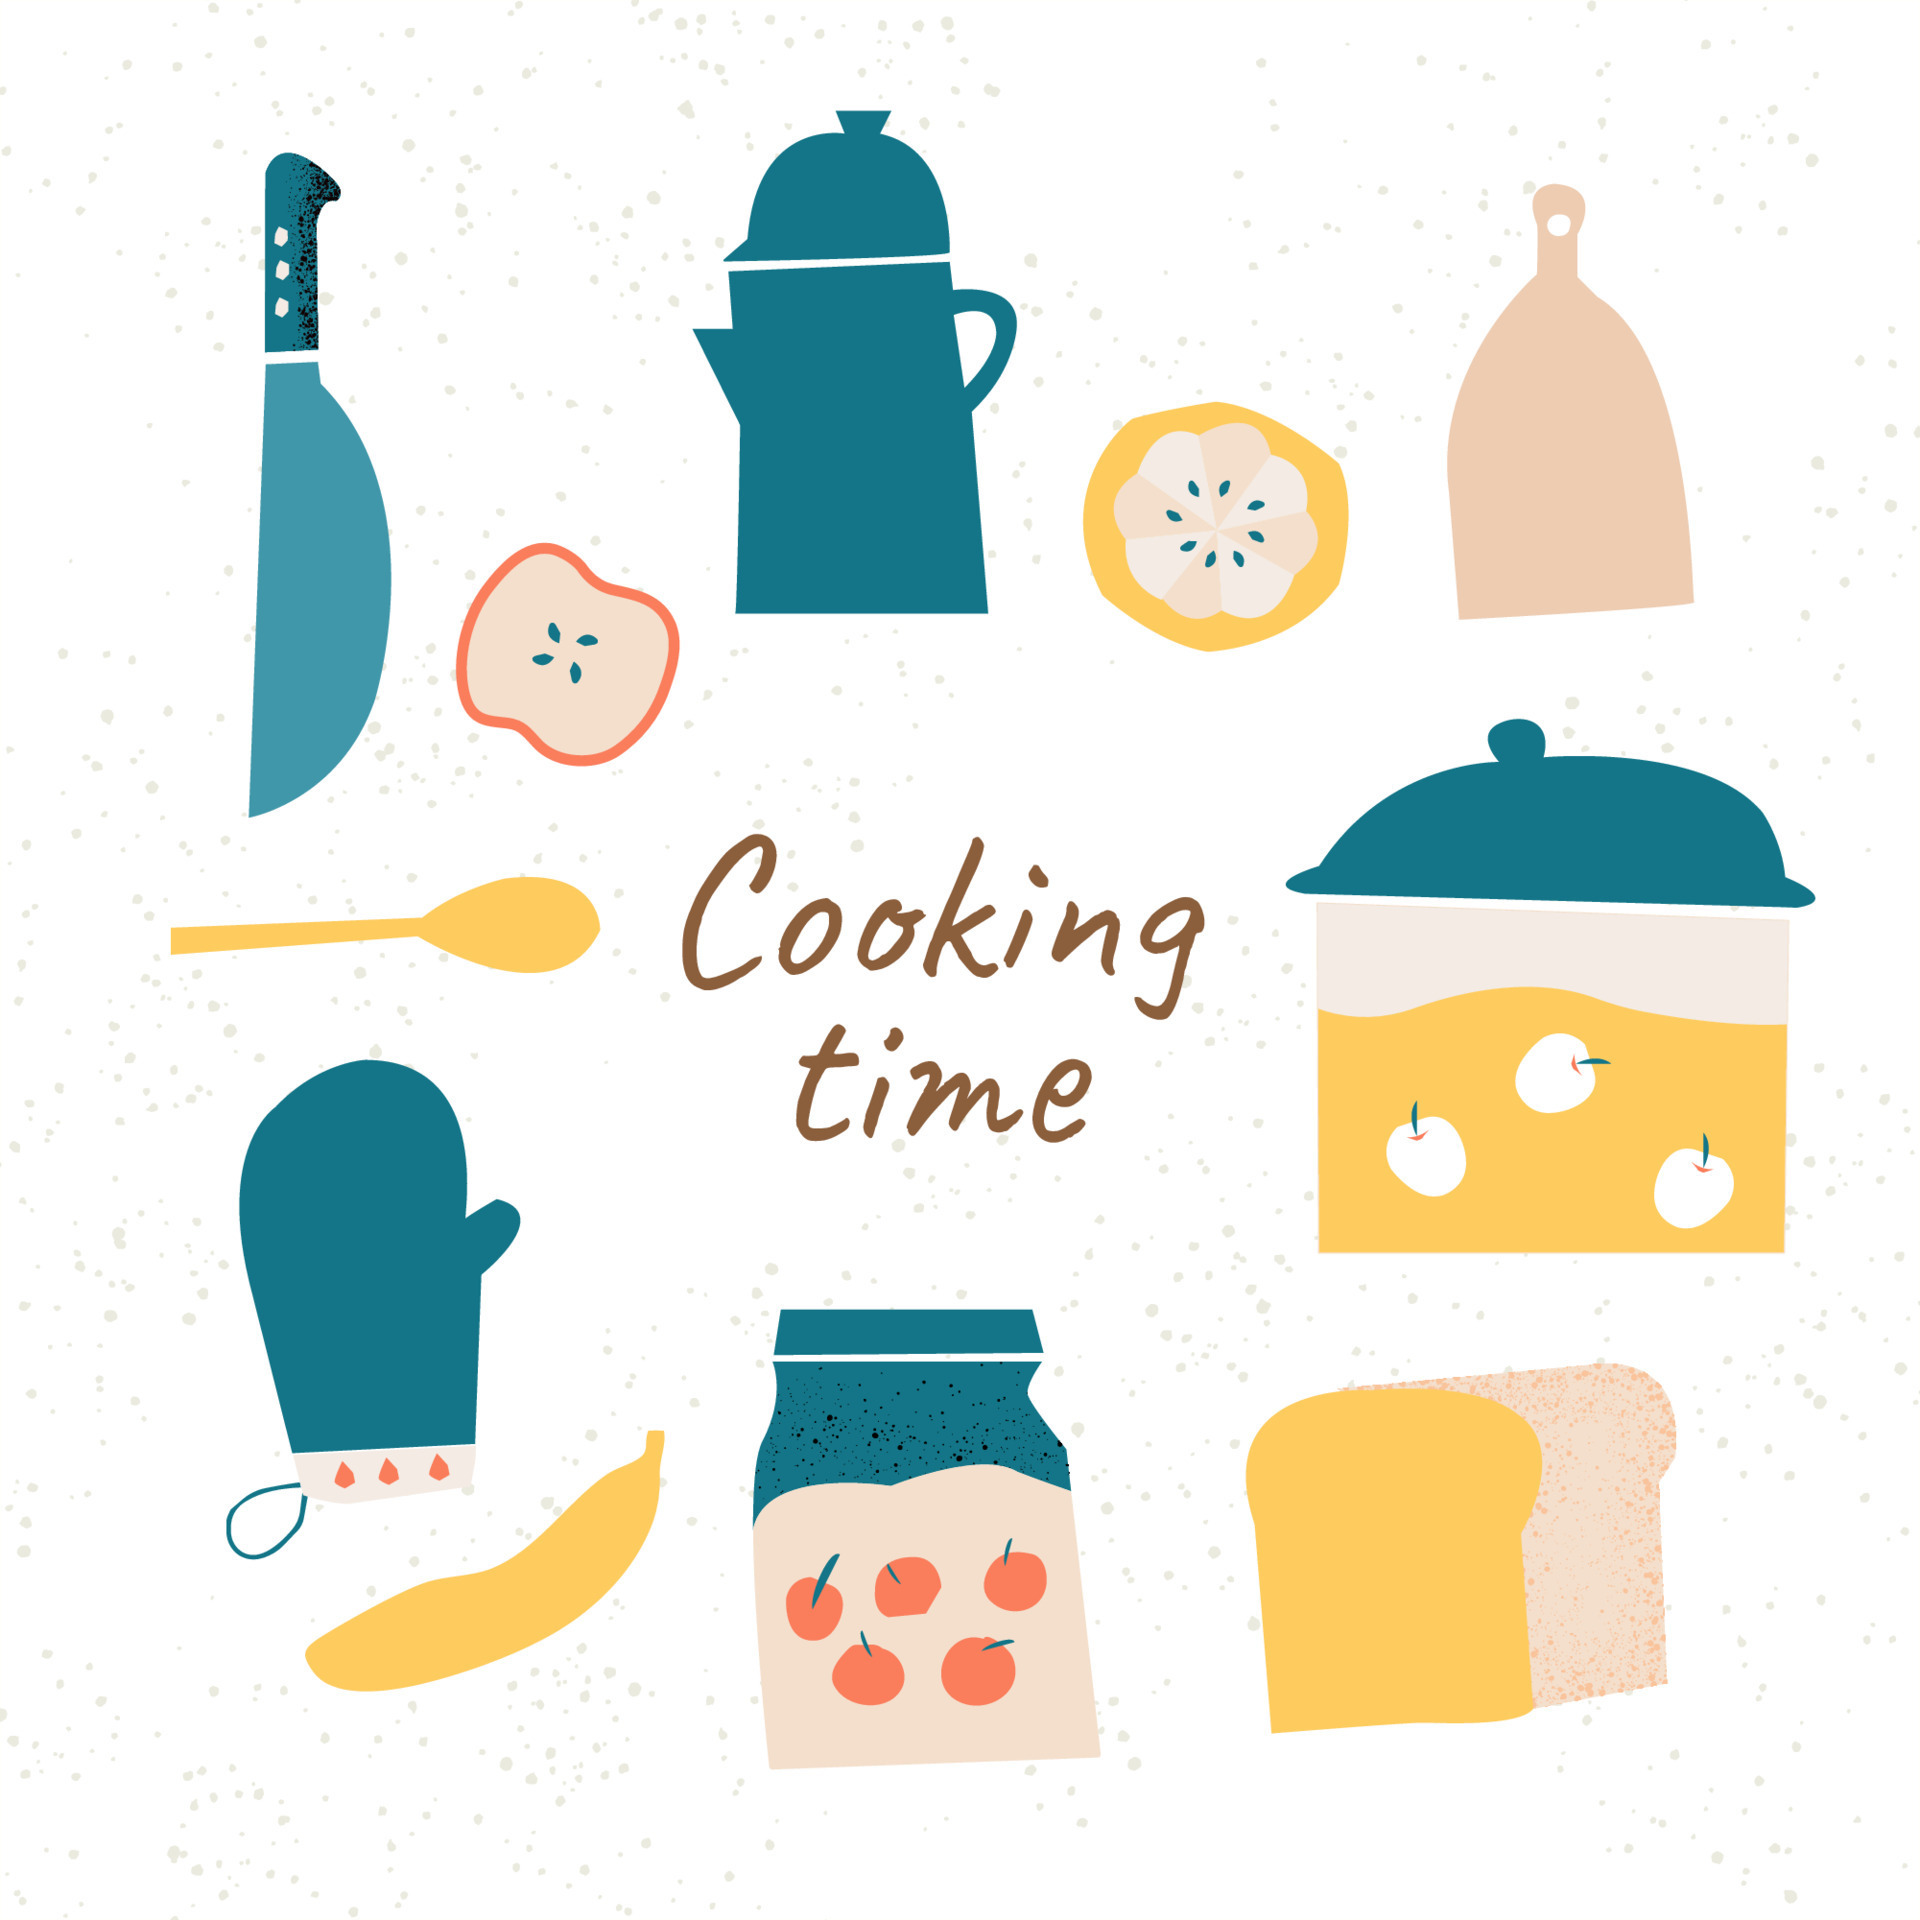 https://static.vecteezy.com/system/resources/previews/012/289/979/original/set-of-cooking-time-kitchen-tool-with-ingredients-illustration-free-vector.jpg